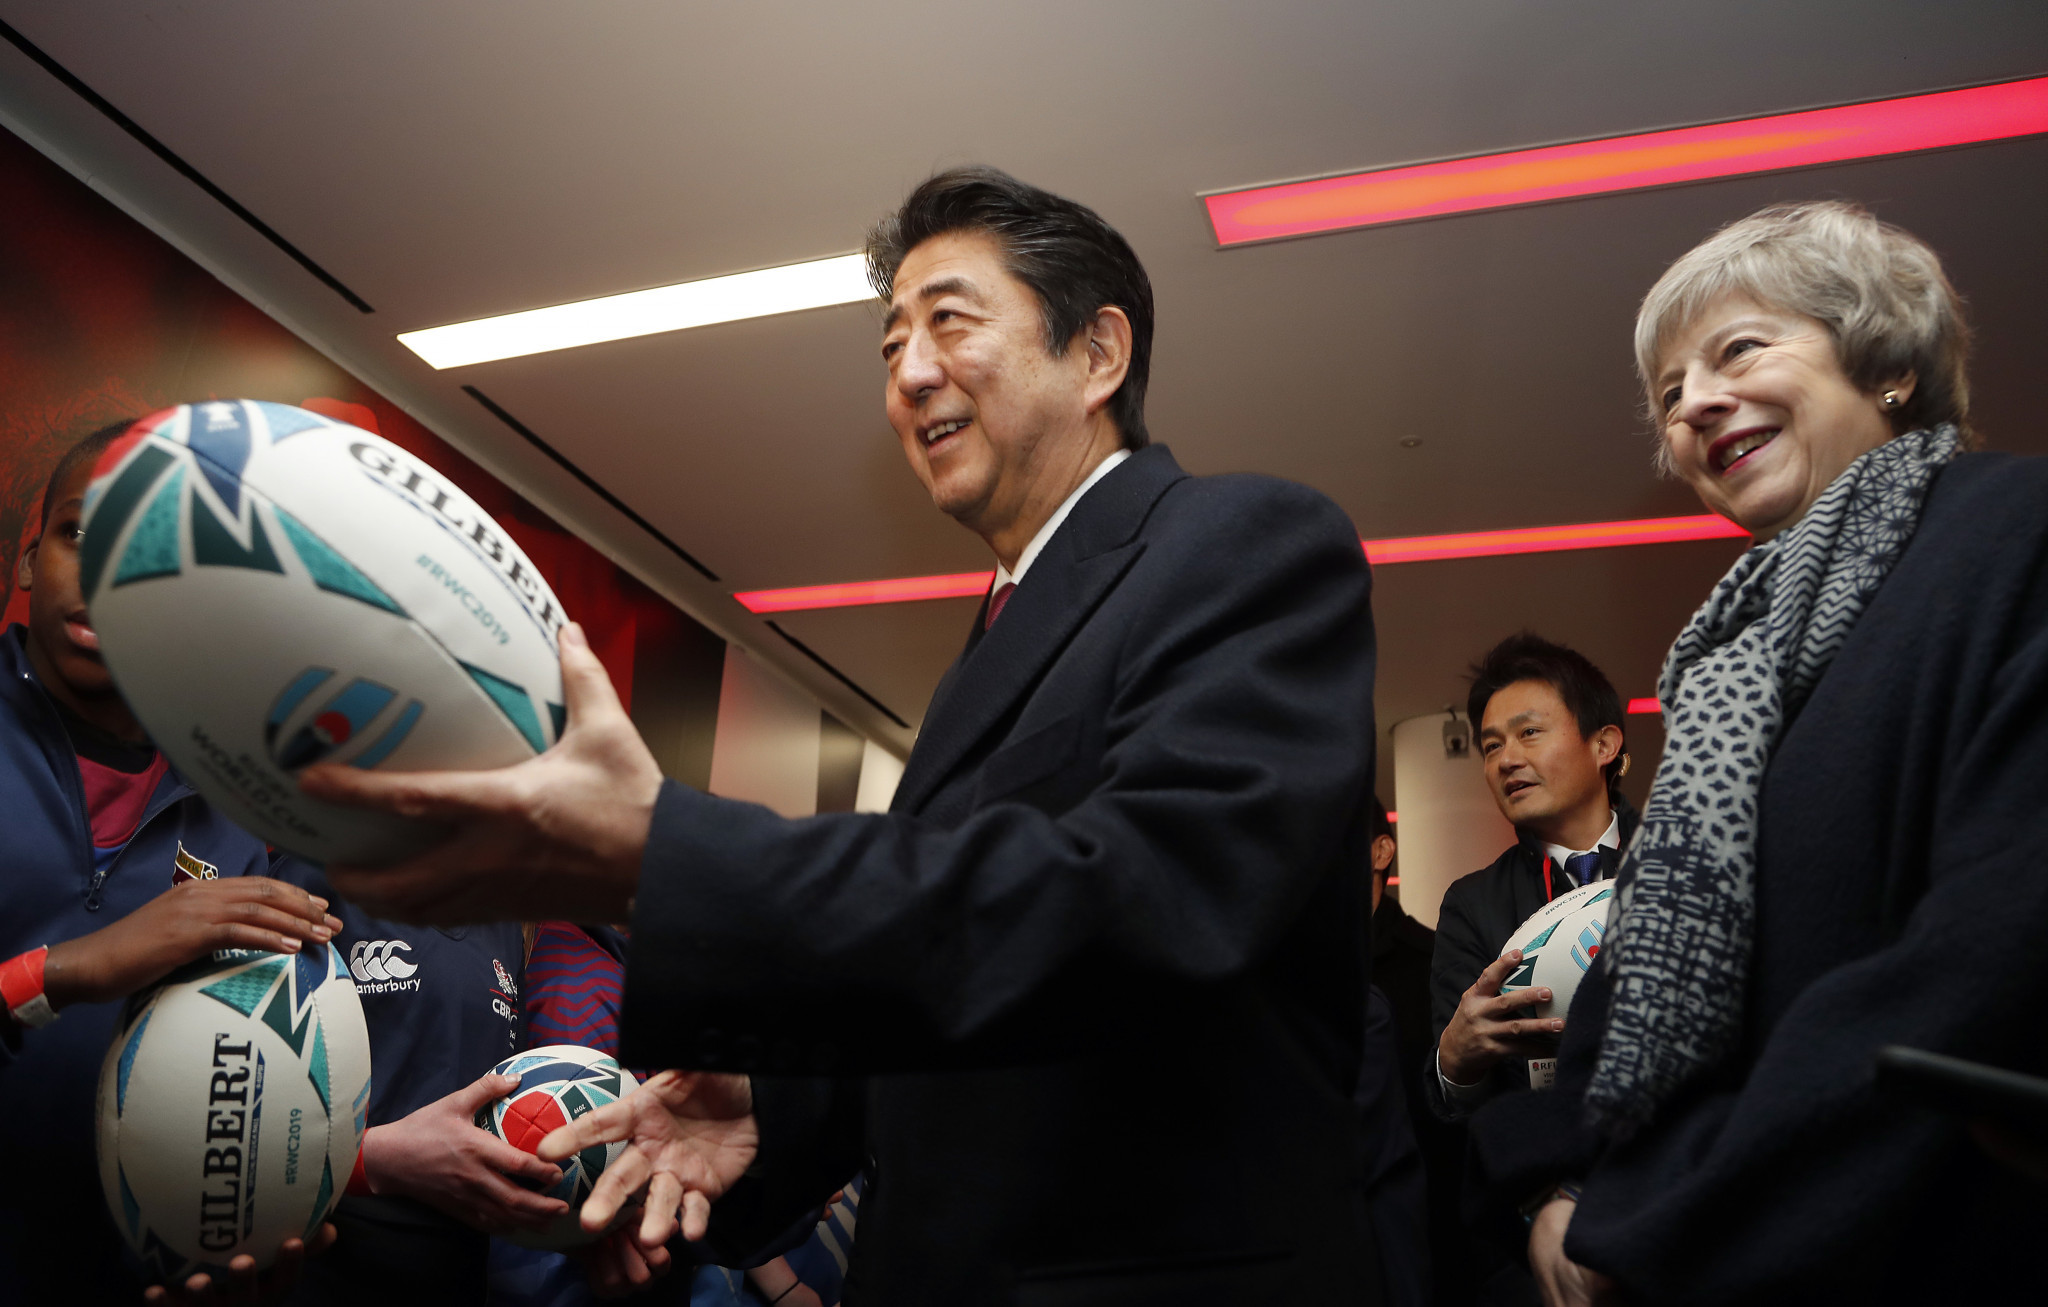 Japanese Prime Minister Shinzō Abe visited Twickenham Stadium with UK counterpart Theresa May during a visit to London this week as his country prepares to host the 2019 Rugby World Cup ©Getty Images